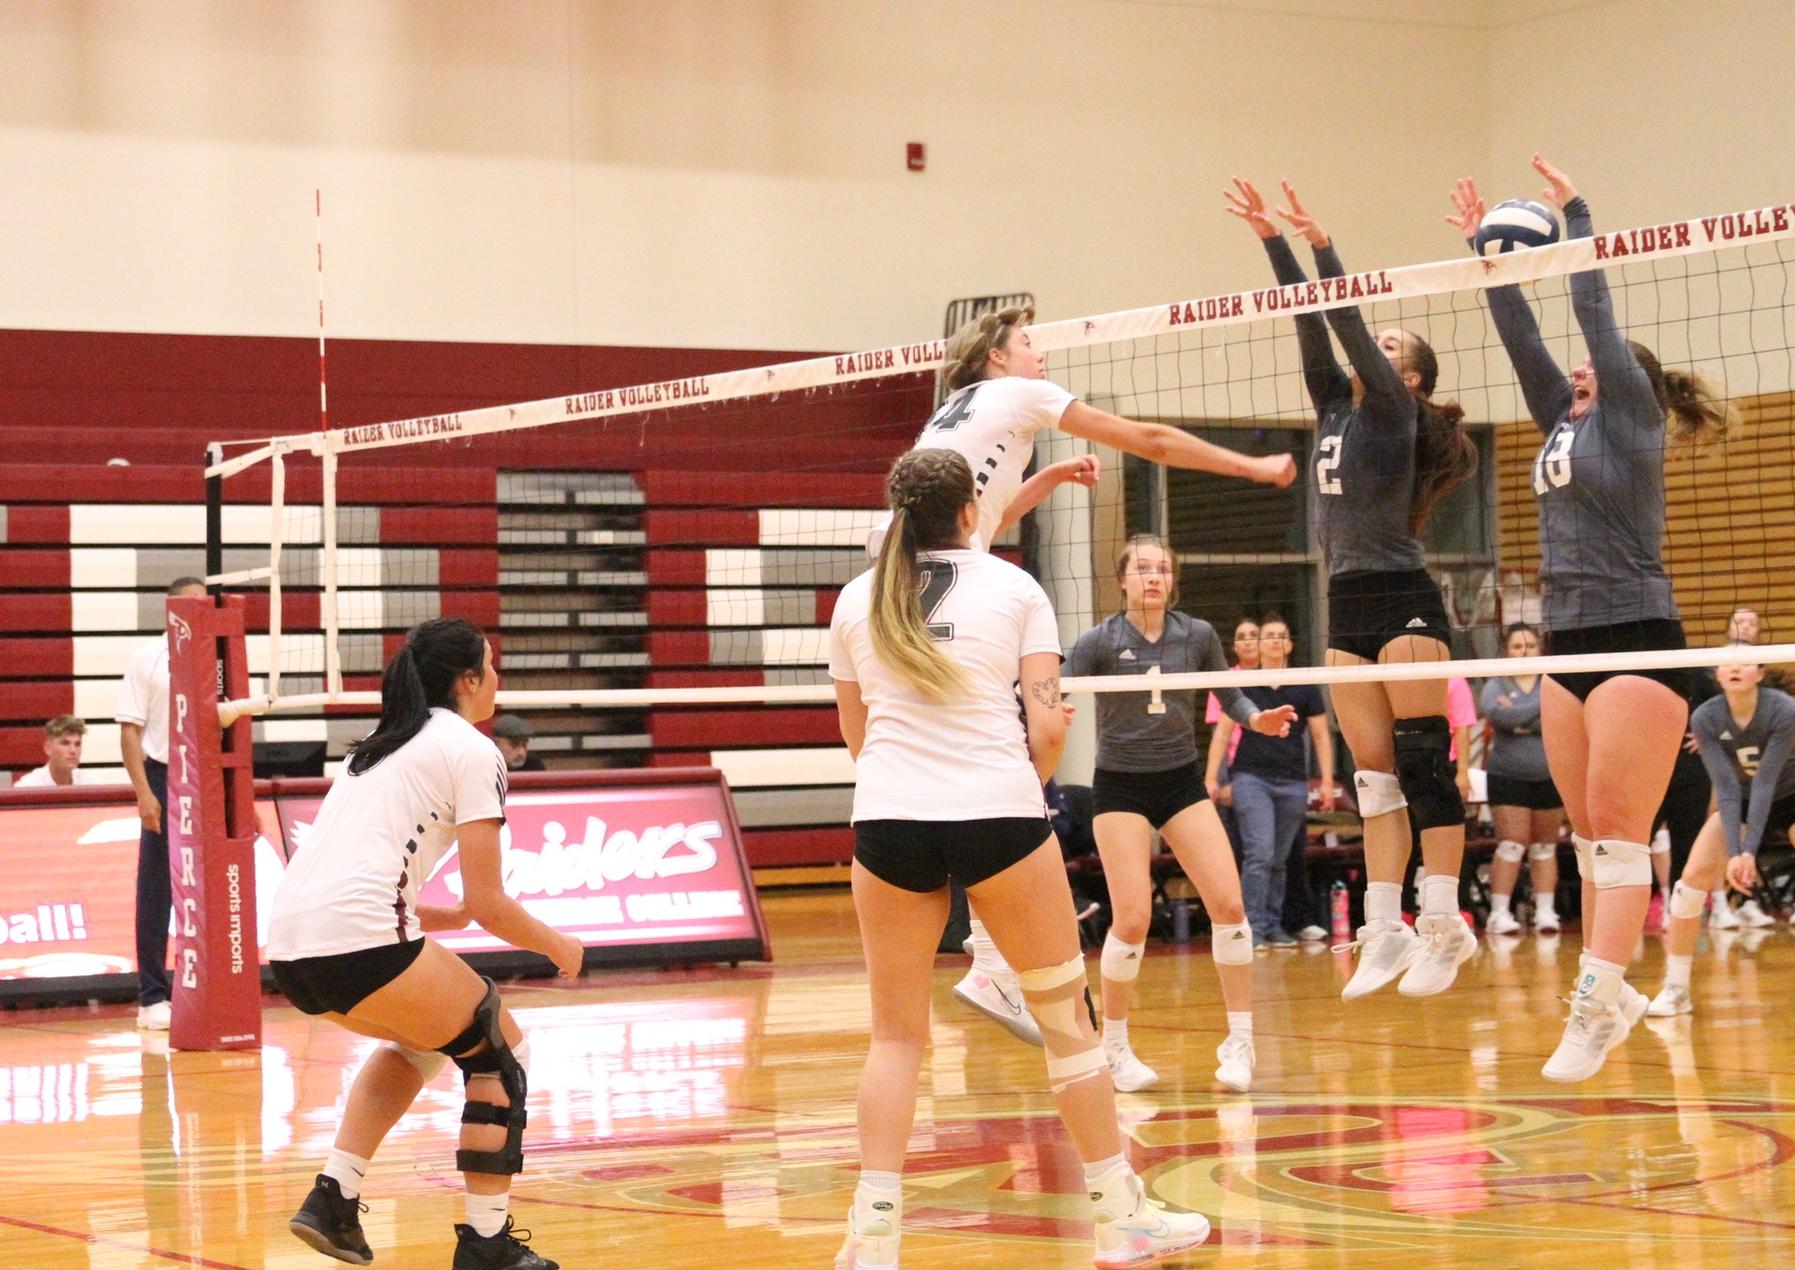 Raiders Fall to Titans in 4-Set Match (10/26/22)